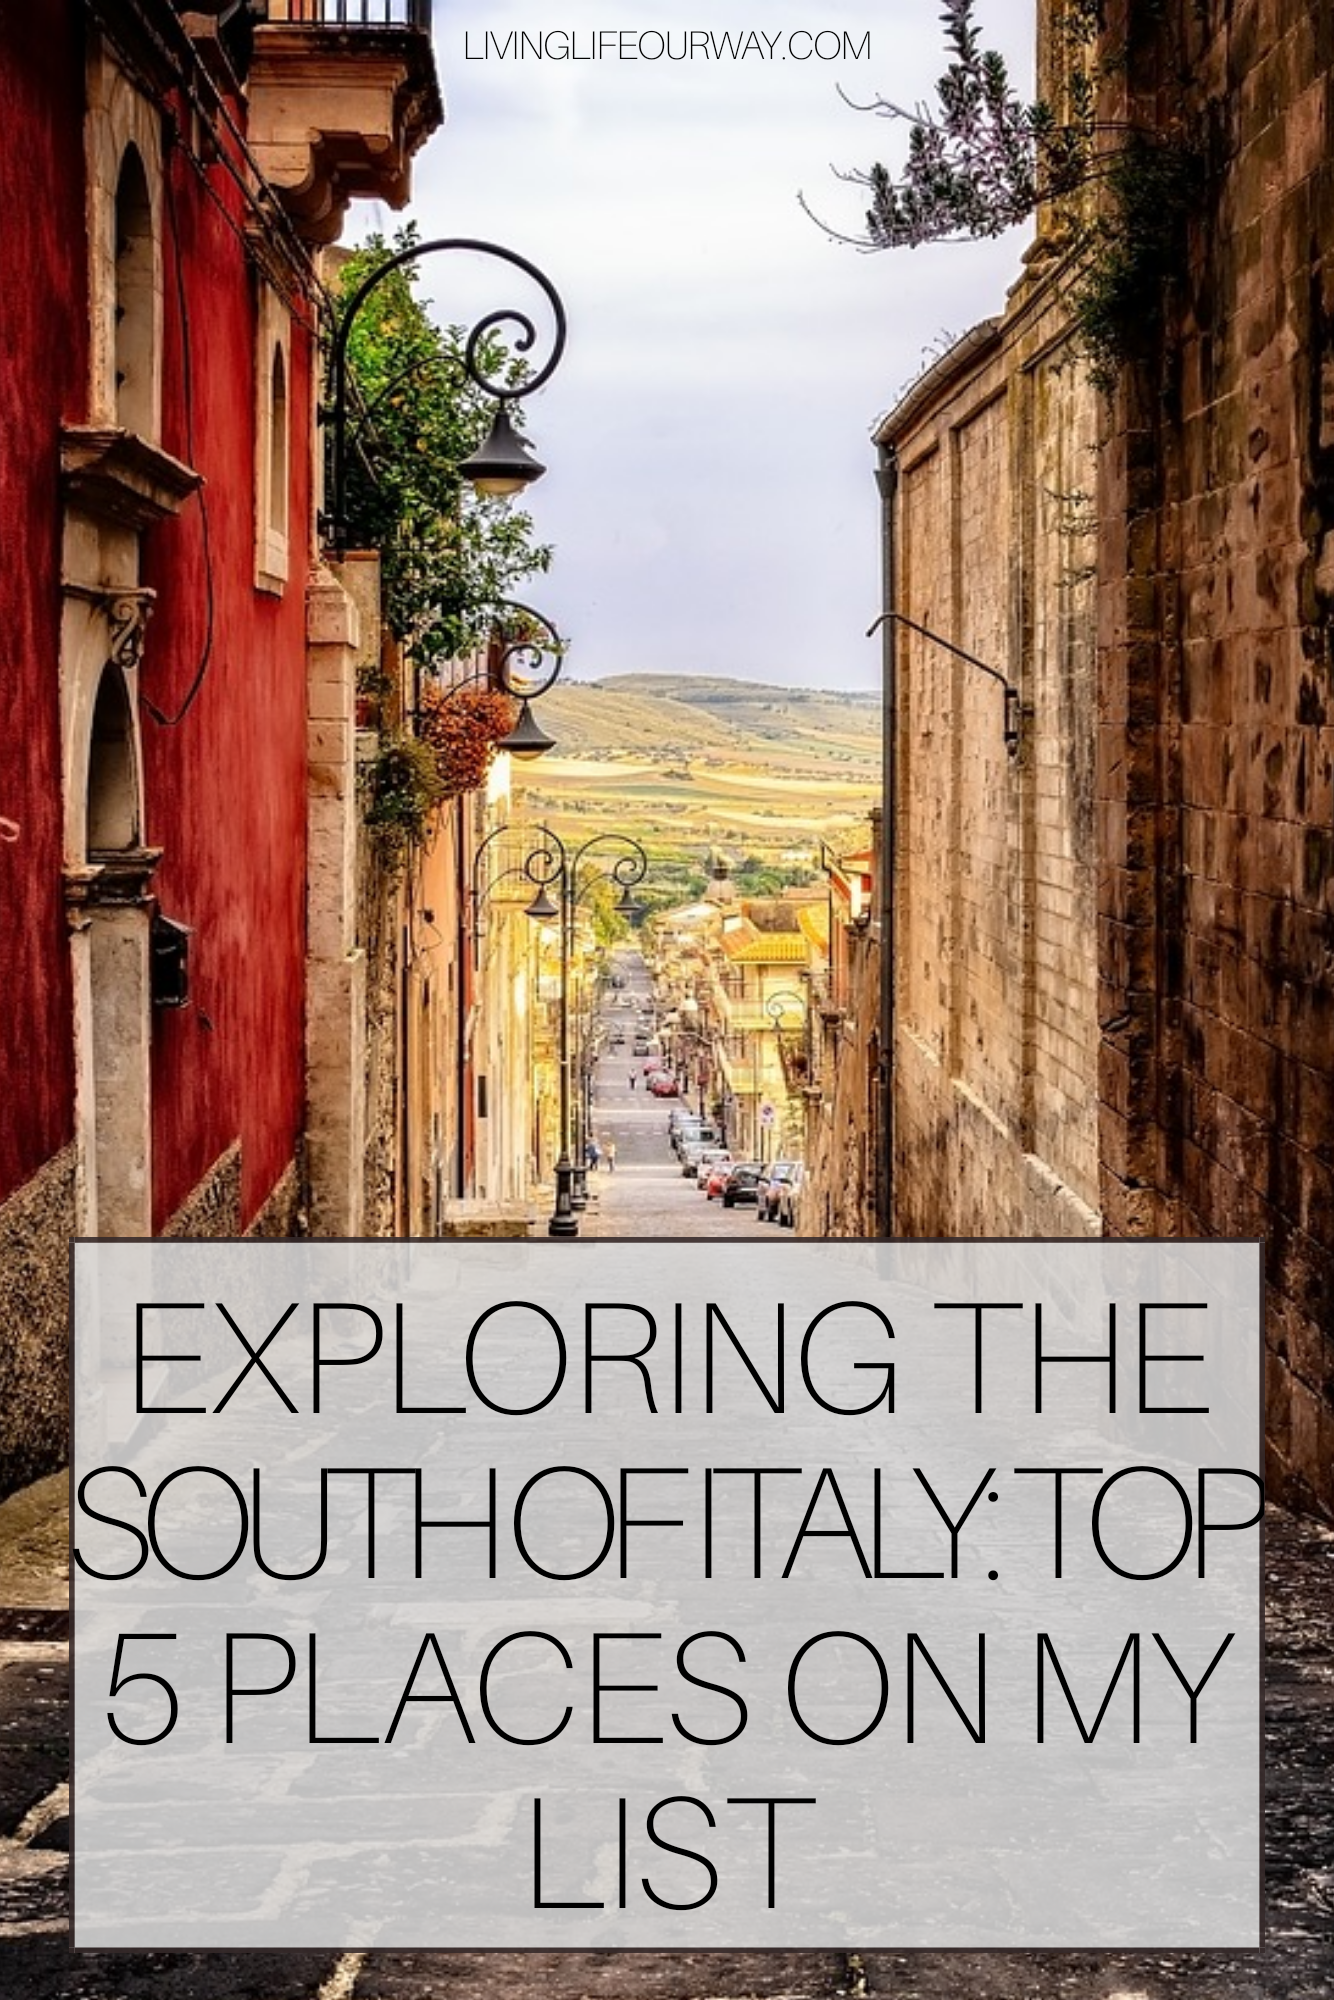 Exploring the south of Italy: top 5 places on my list